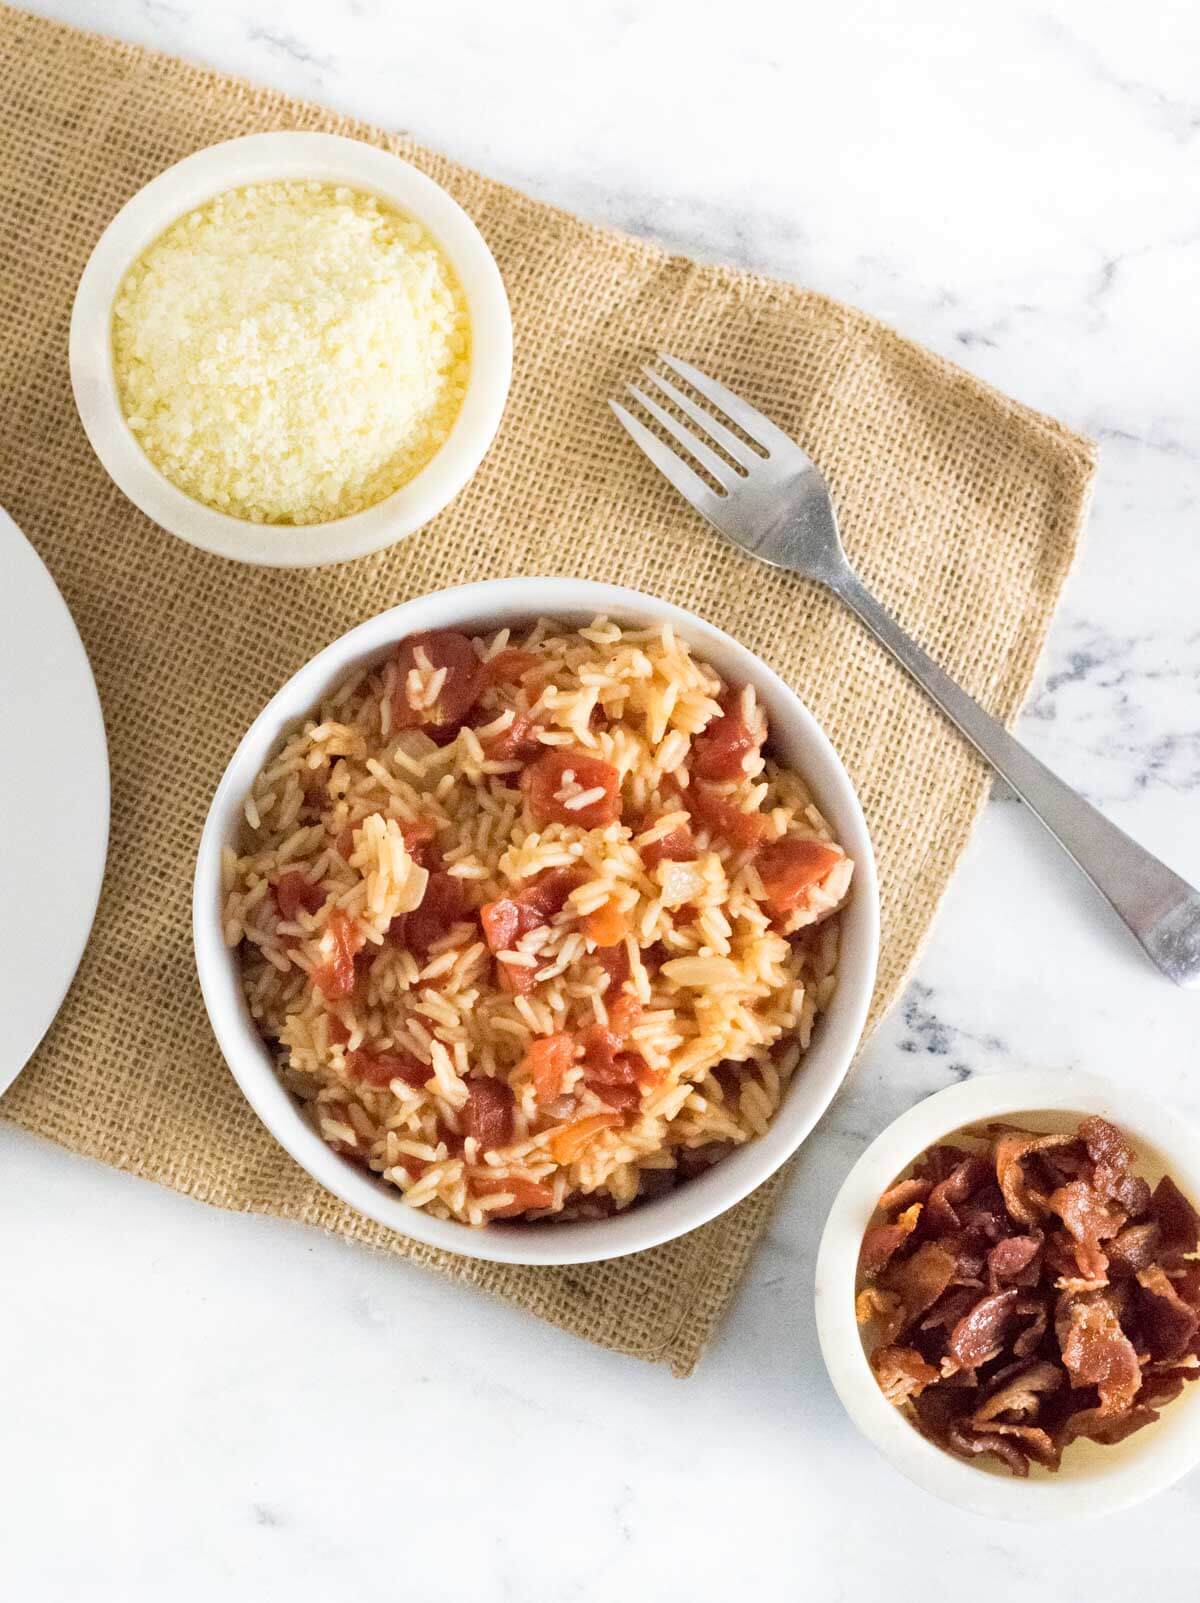 Tomatoes and rice served with bacon and Parmesan cheese.